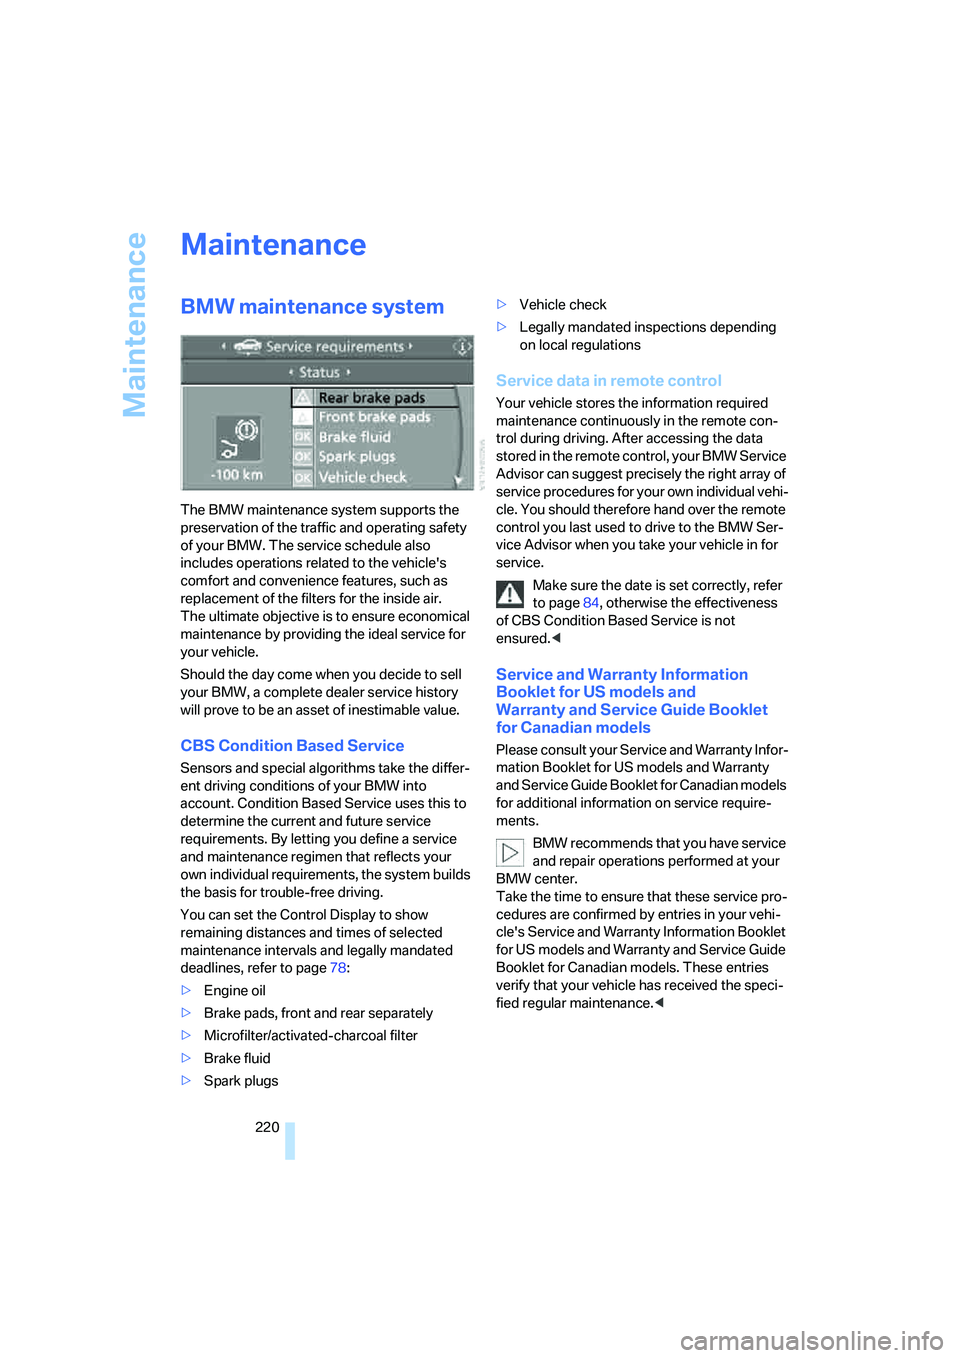 BMW 530I 2007  Owners Manual Maintenance
220
Maintenance
BMW maintenance system
The BMW maintenance system supports the 
preservation of the traffic and operating safety 
of your BMW. The service schedule also 
includes operation